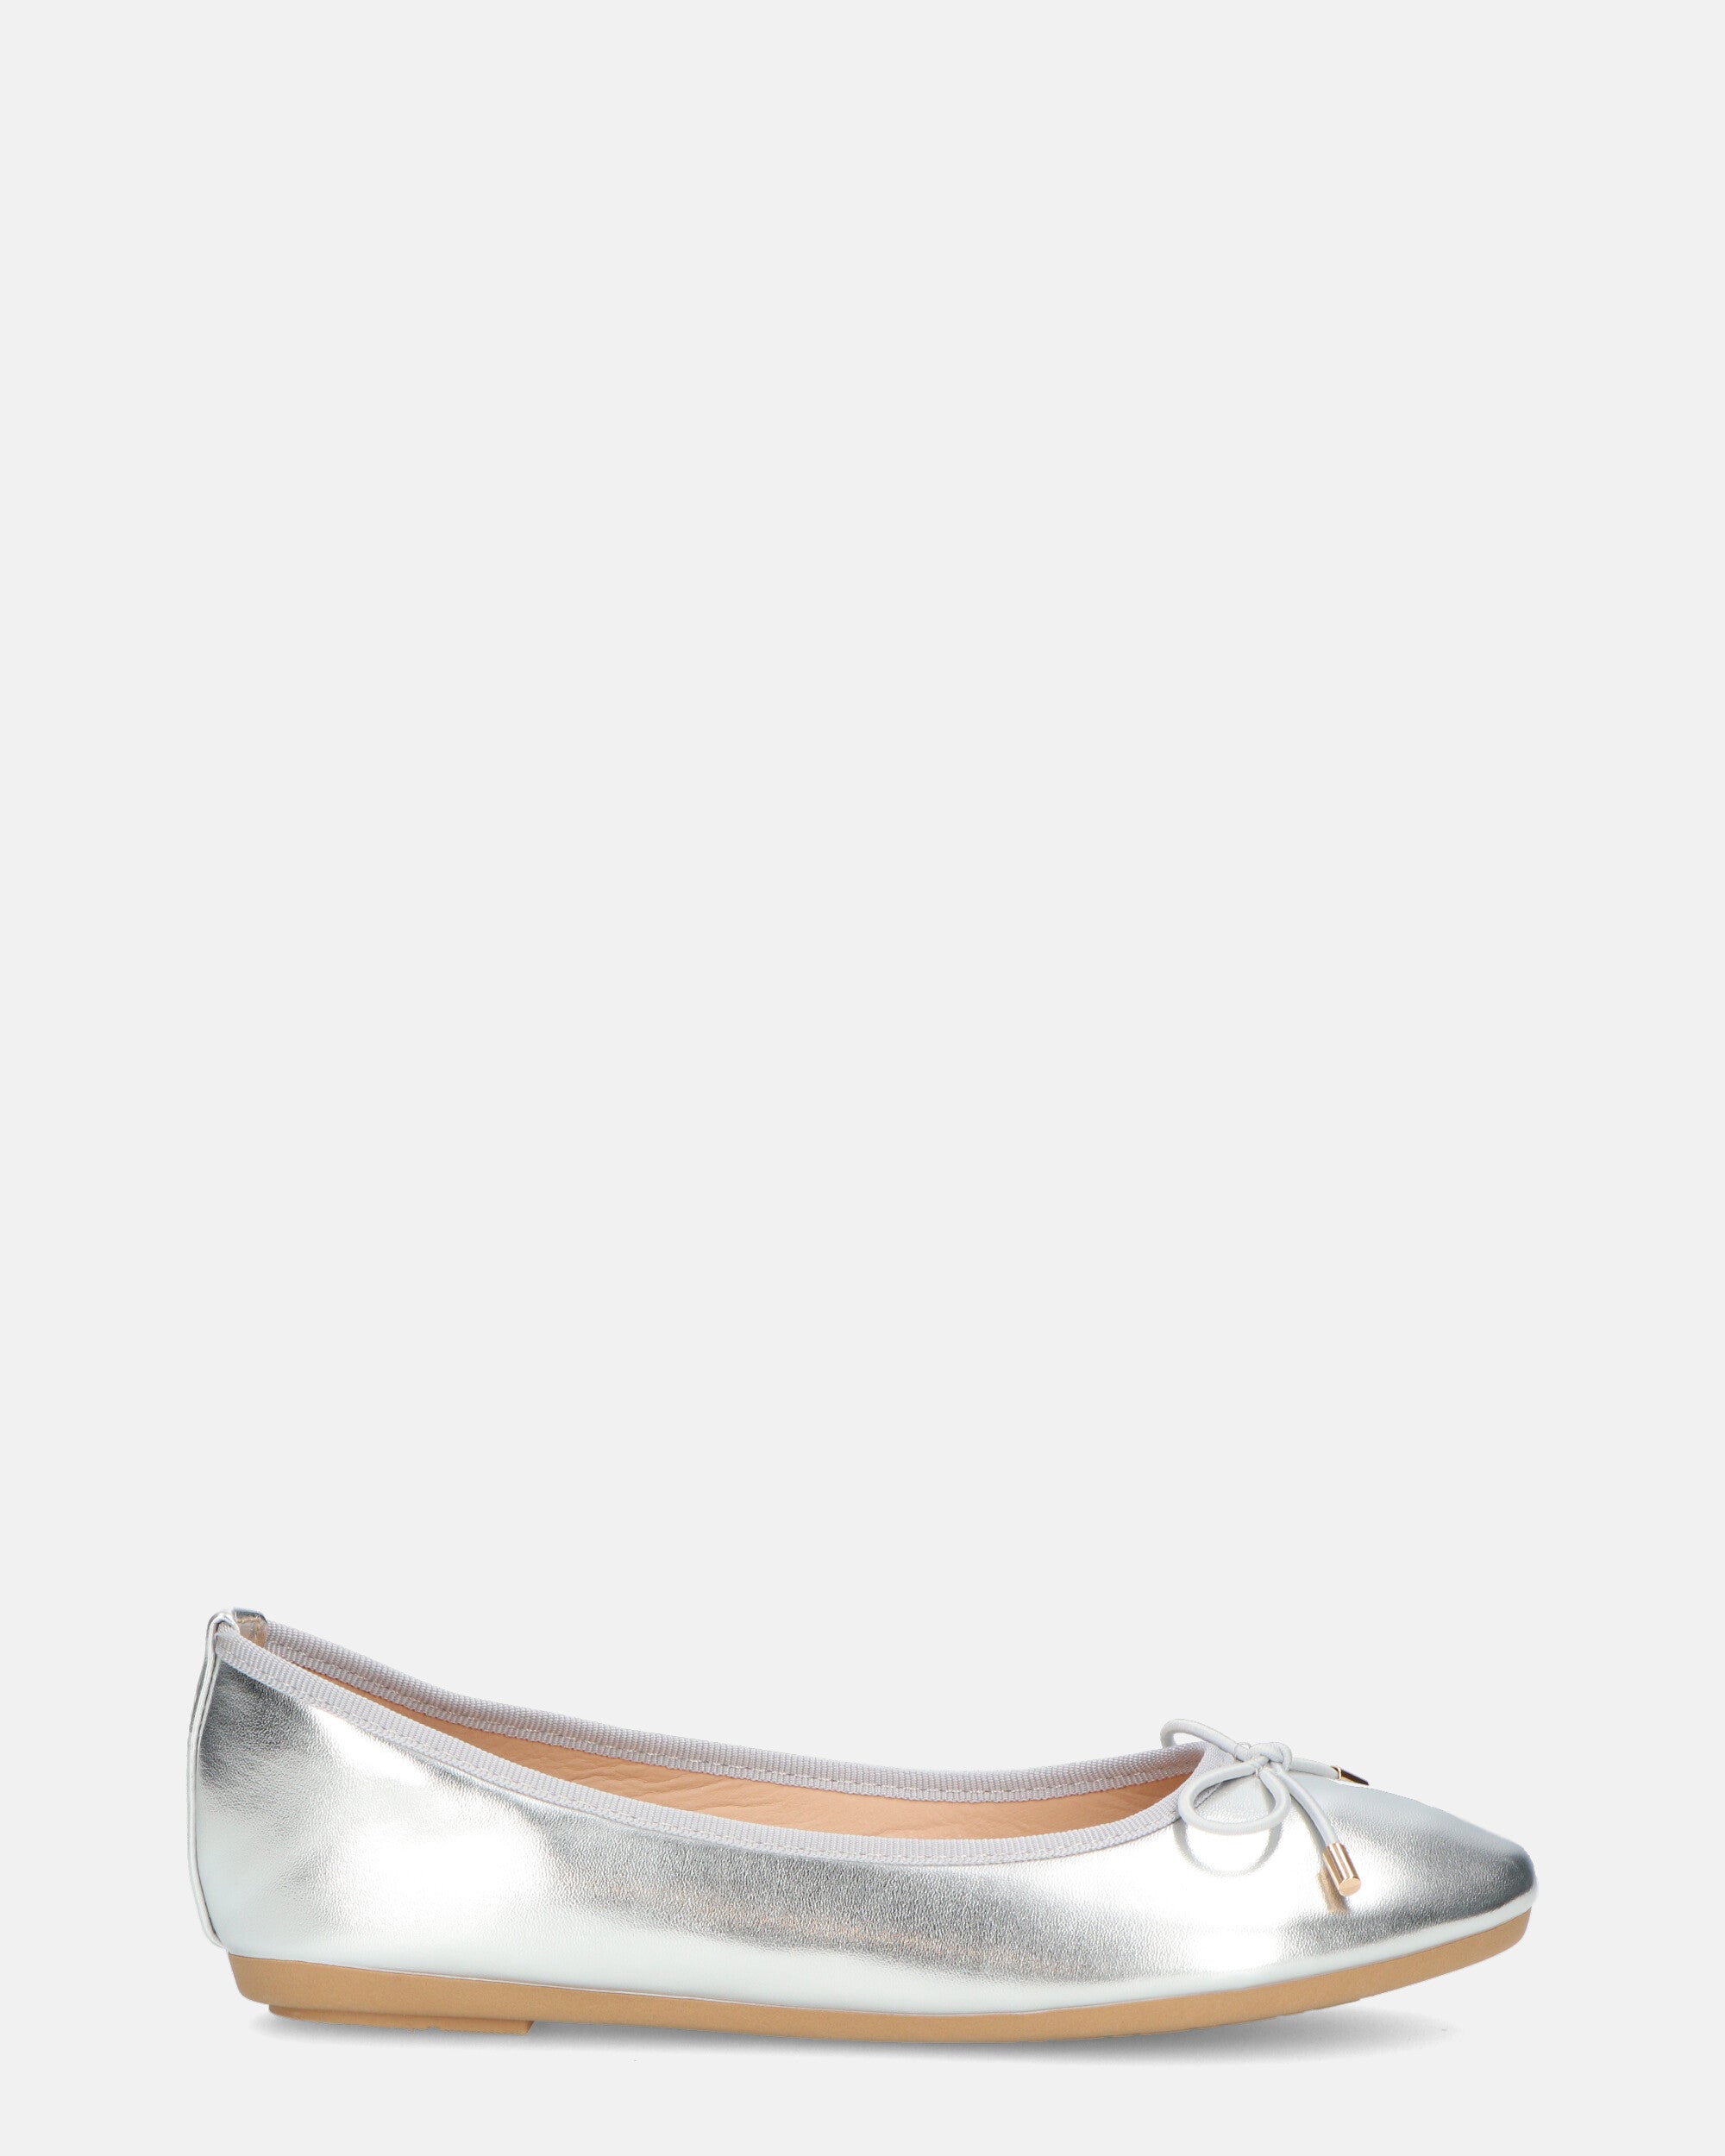 GWEN - silver ballet flats with bow on toe